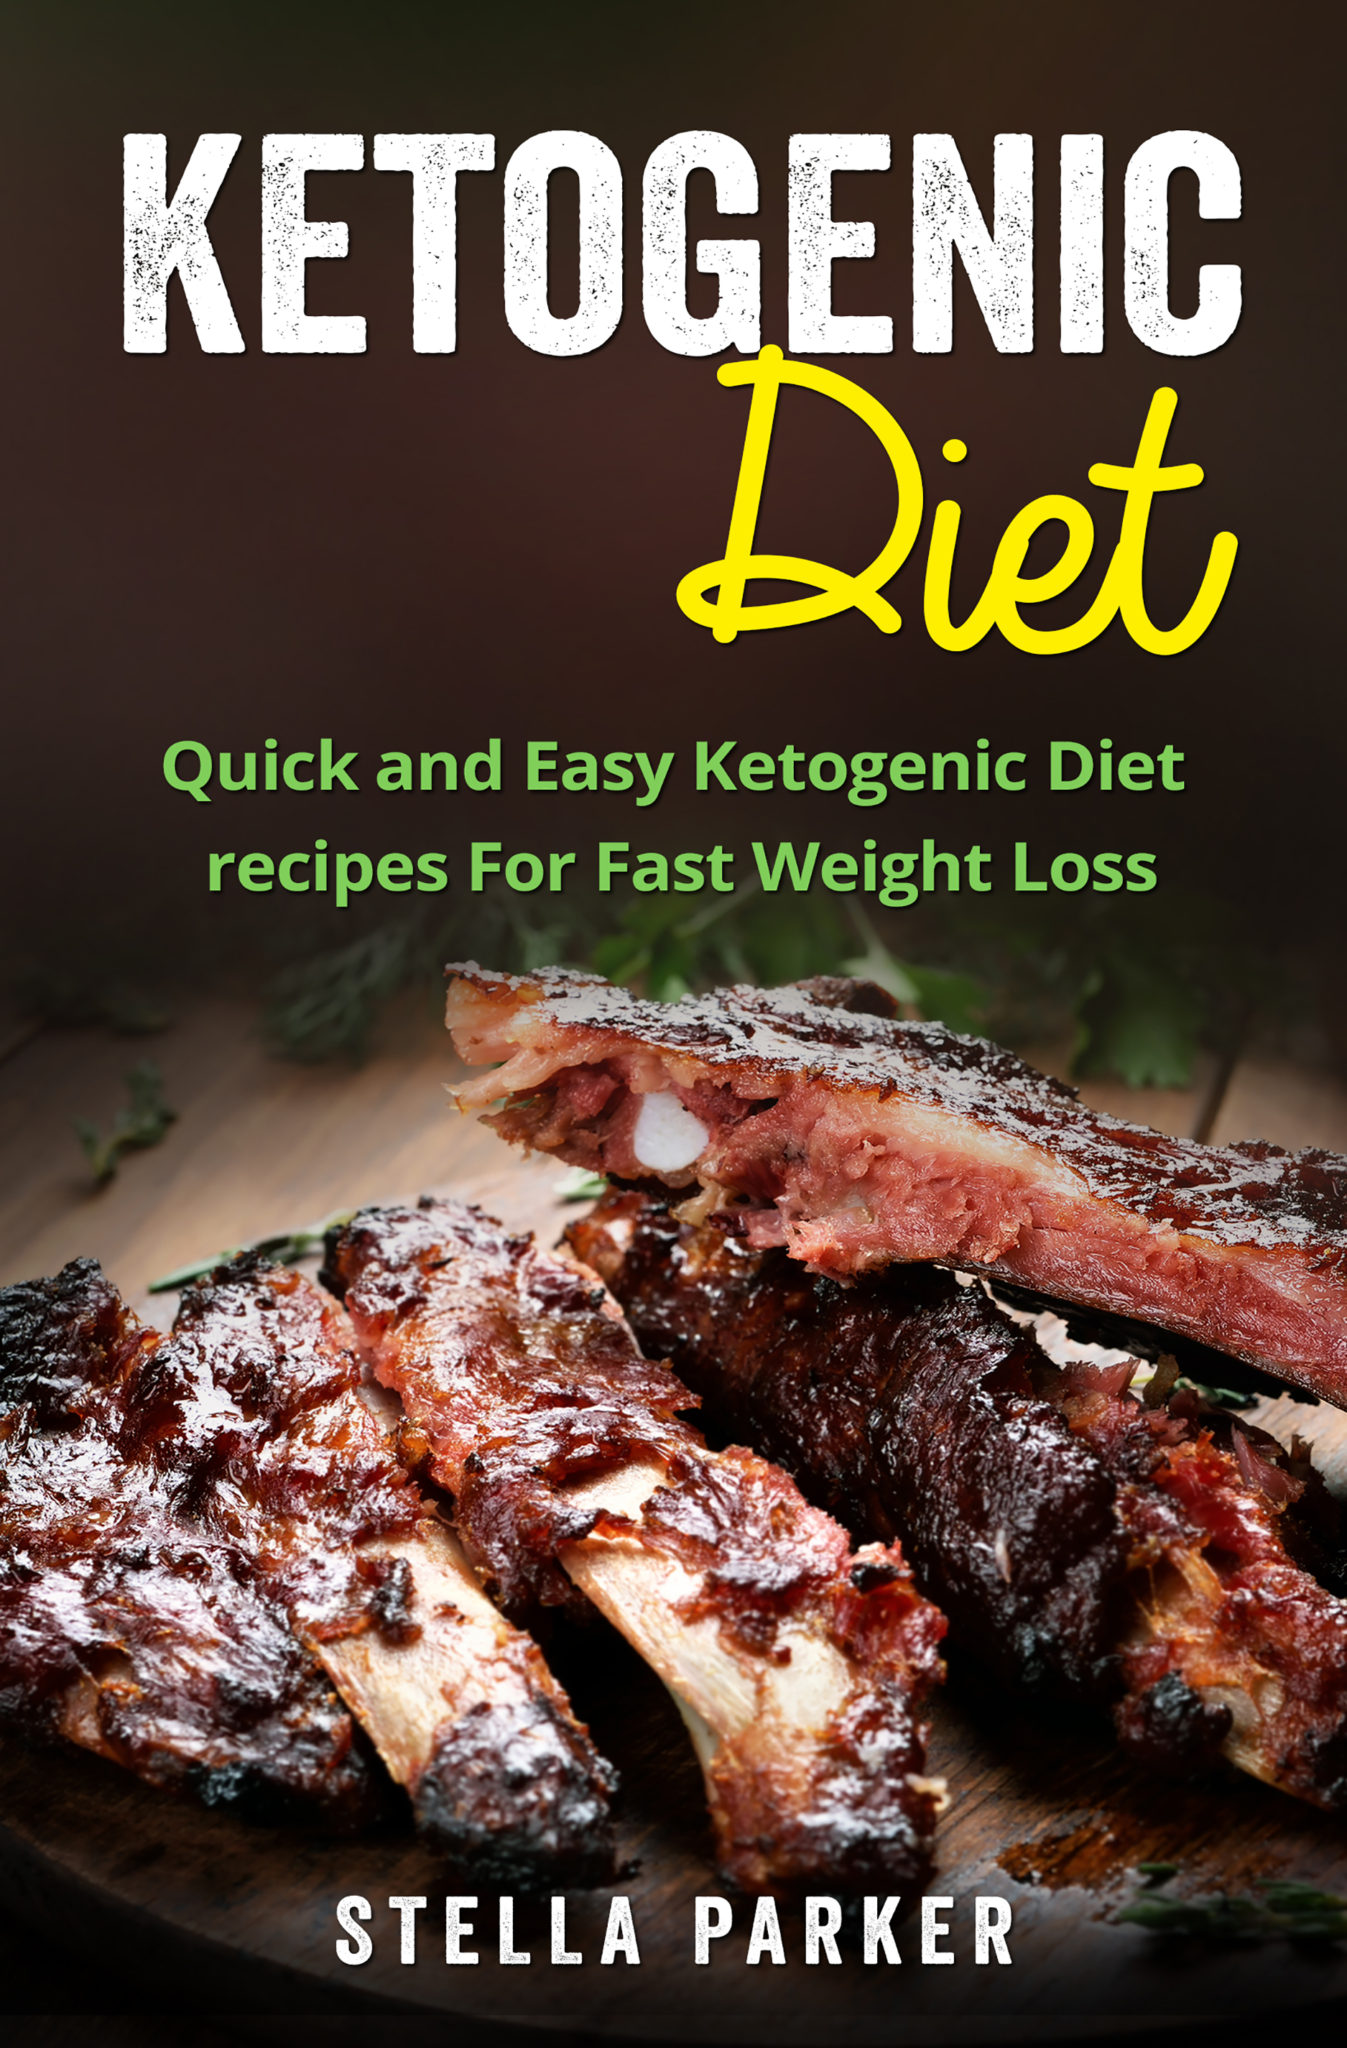 FREE: Ketogenic Diet – Quick and Easy Ketogenic Diet Recipes For Fast Weight Loss by Stella Parker